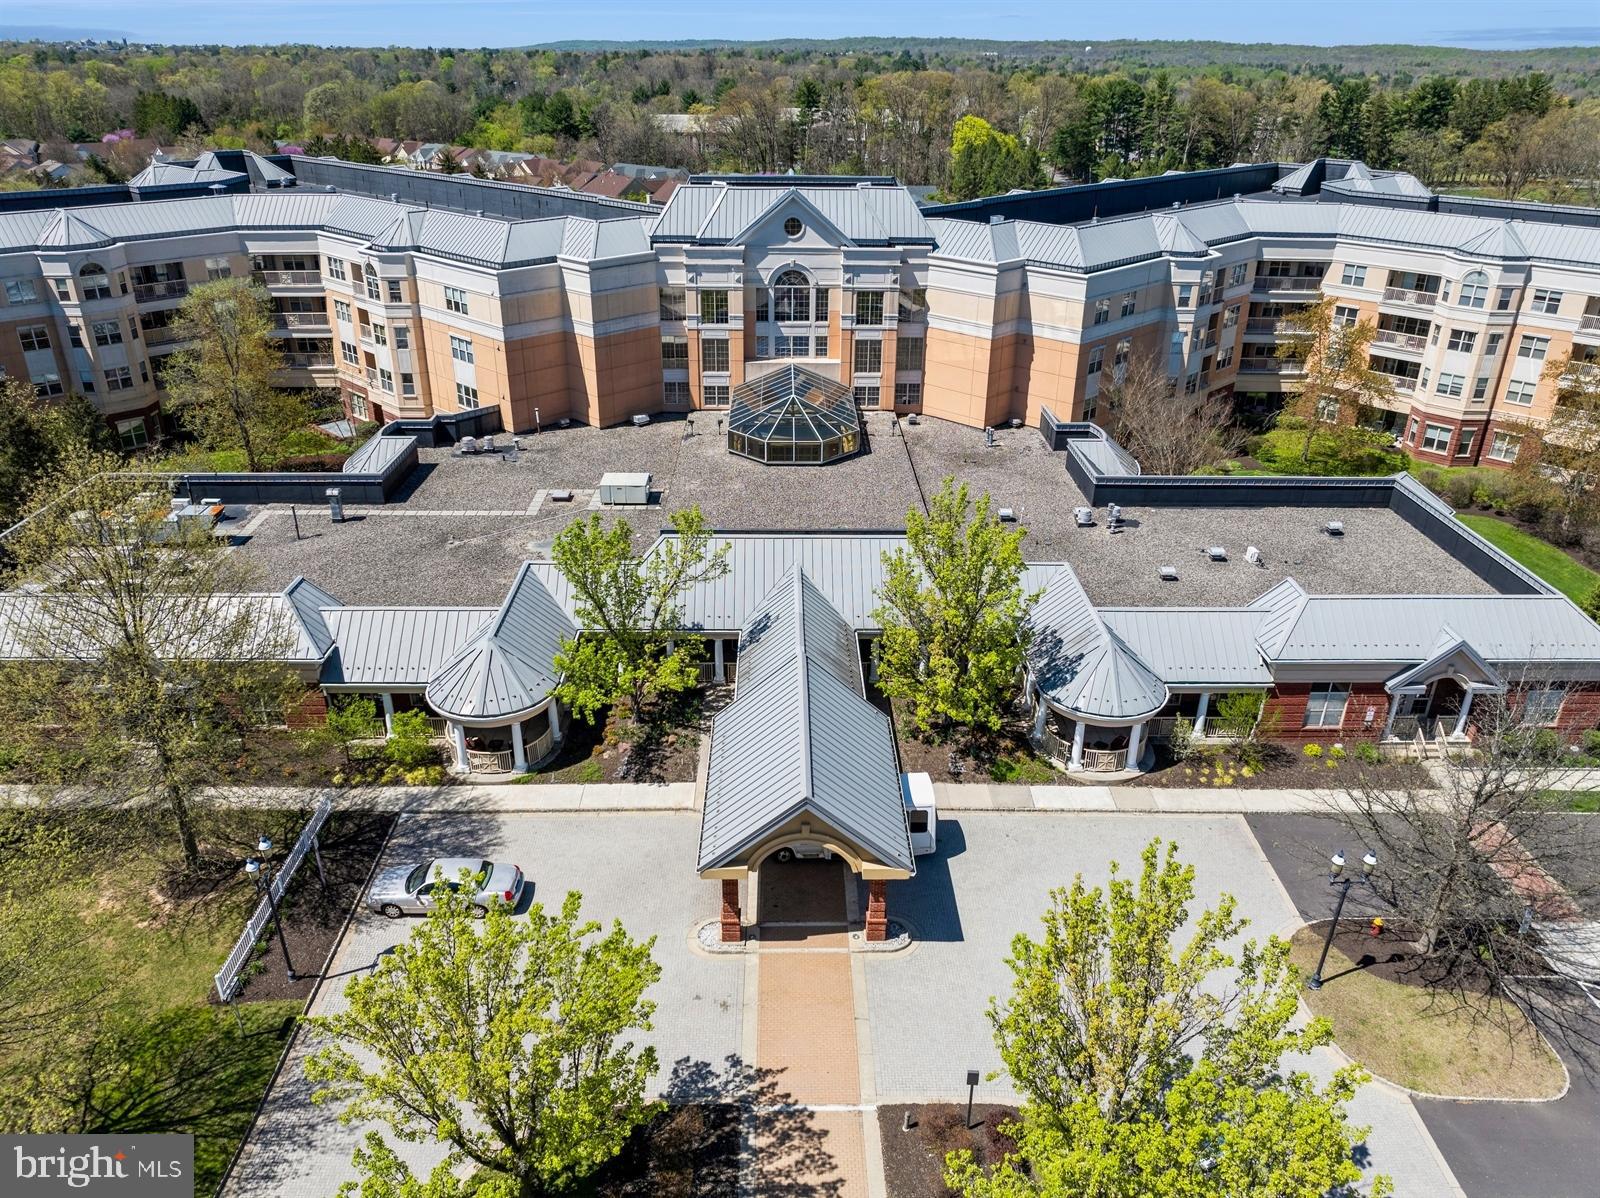 an aerial view of residential houses with outdoor space and parking